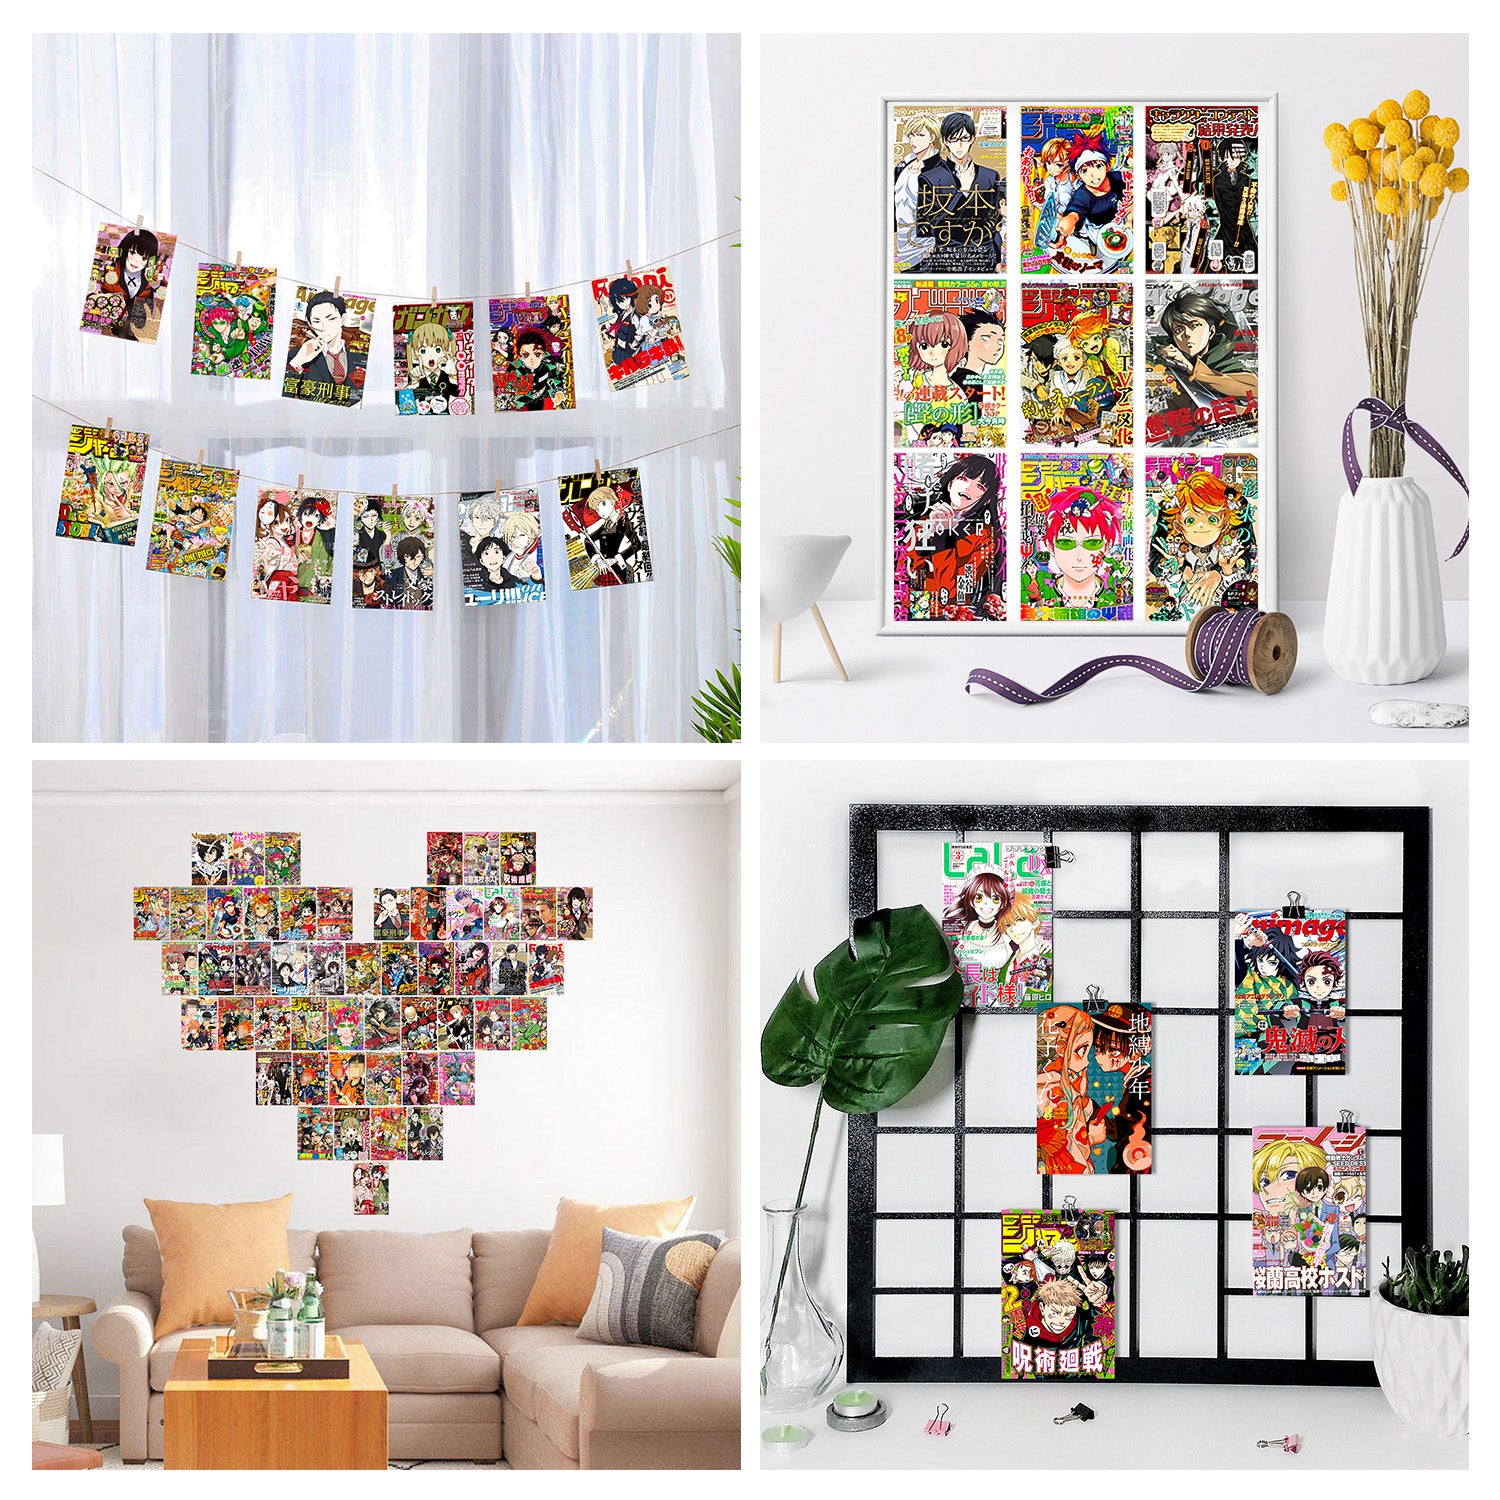 50Pcs Attack on Titan Anime Panel Wall Collage Kit Sticker for